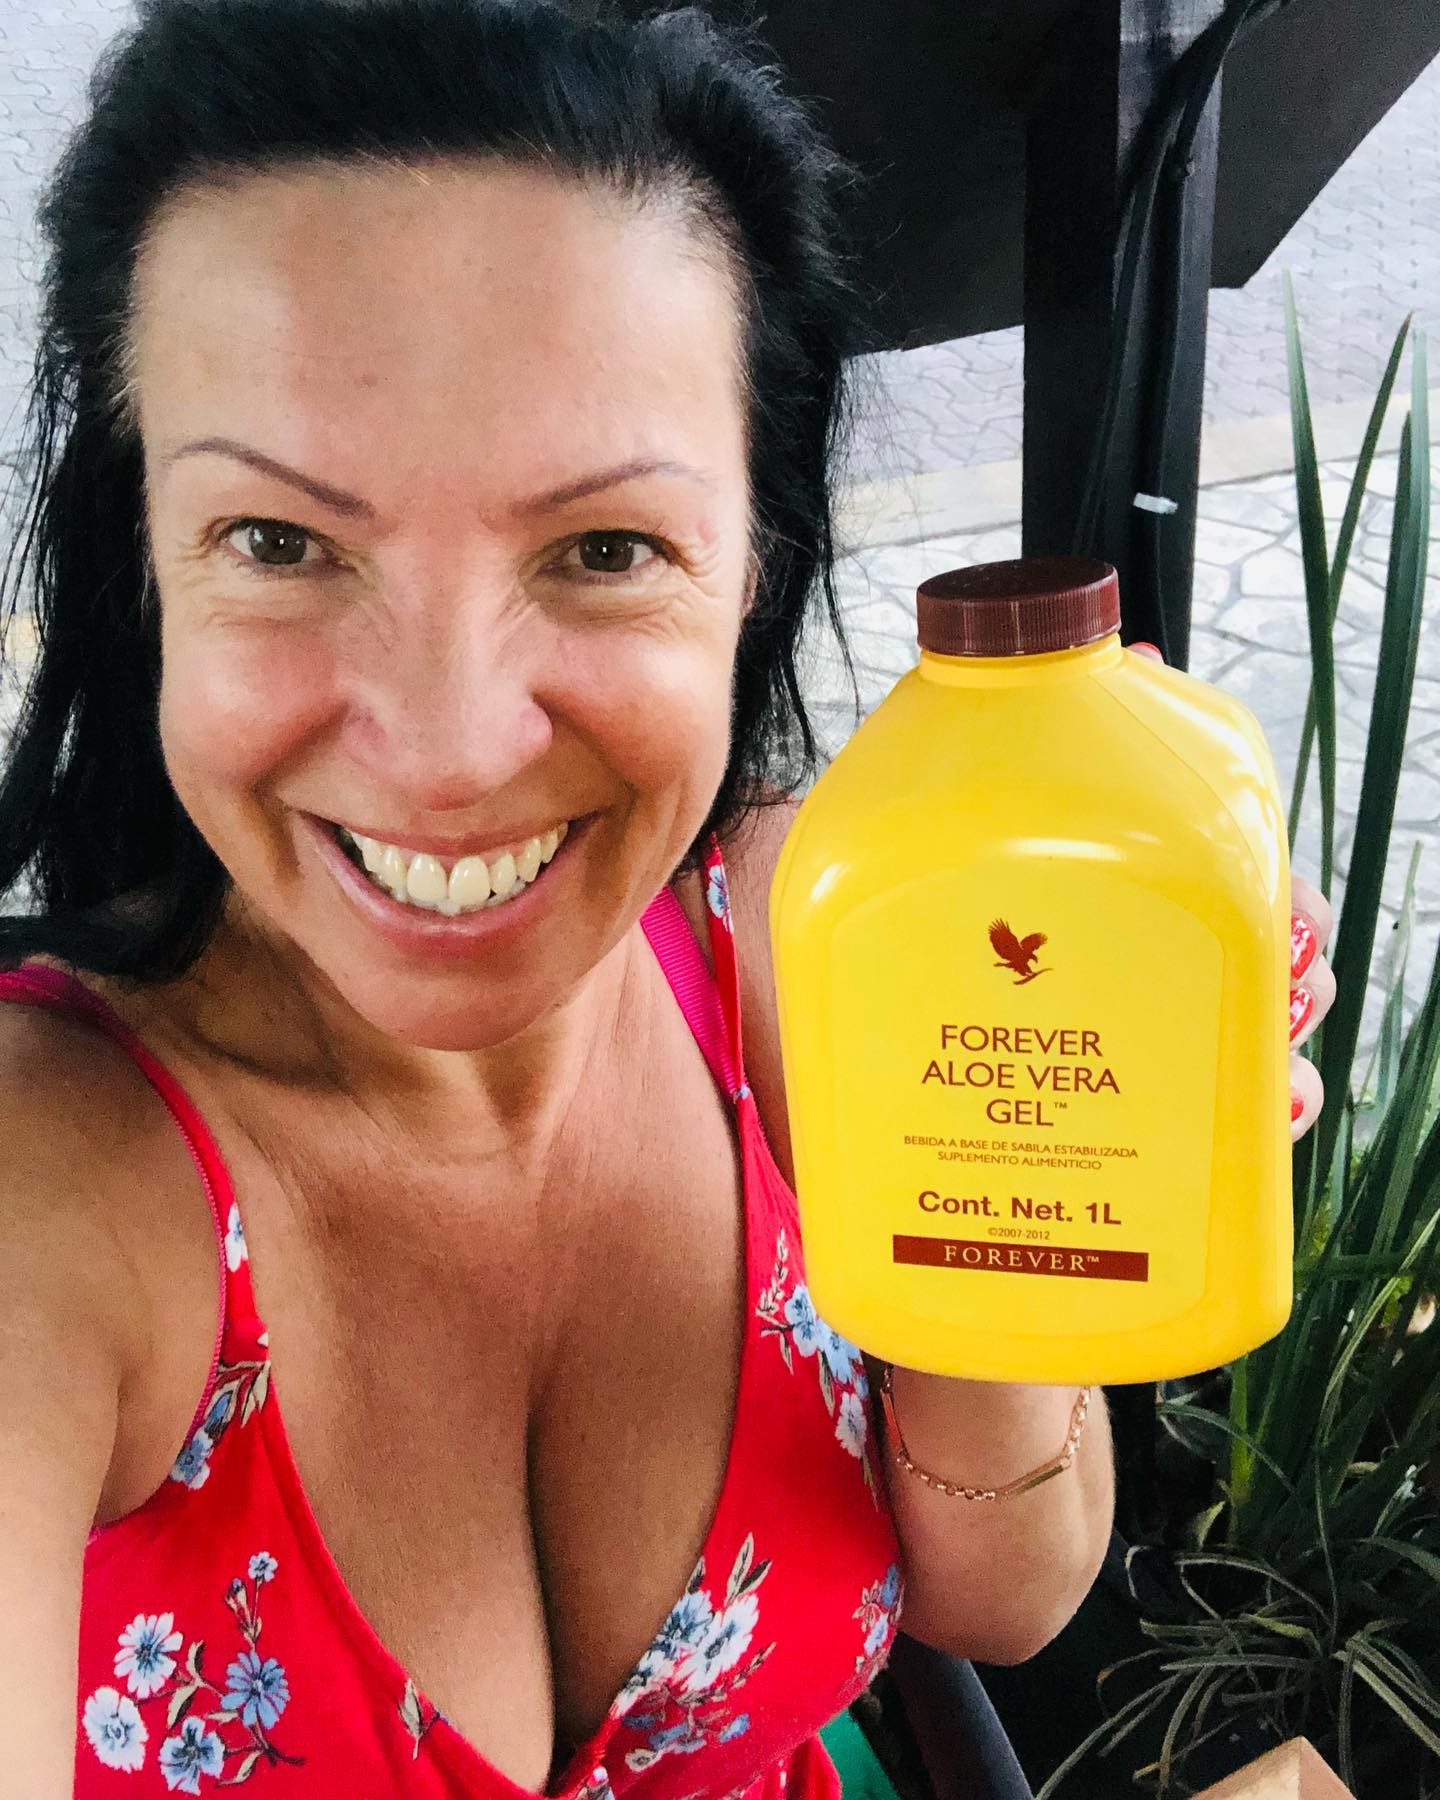 Reunited with my love!!! I have missed my daily shots of Aloe Vera soooo much, after lots of hunting and google translating, I have found an FBO in Playa Del Carmen and I have my daily goodness again!!! @forevermexicohq @foreveruk